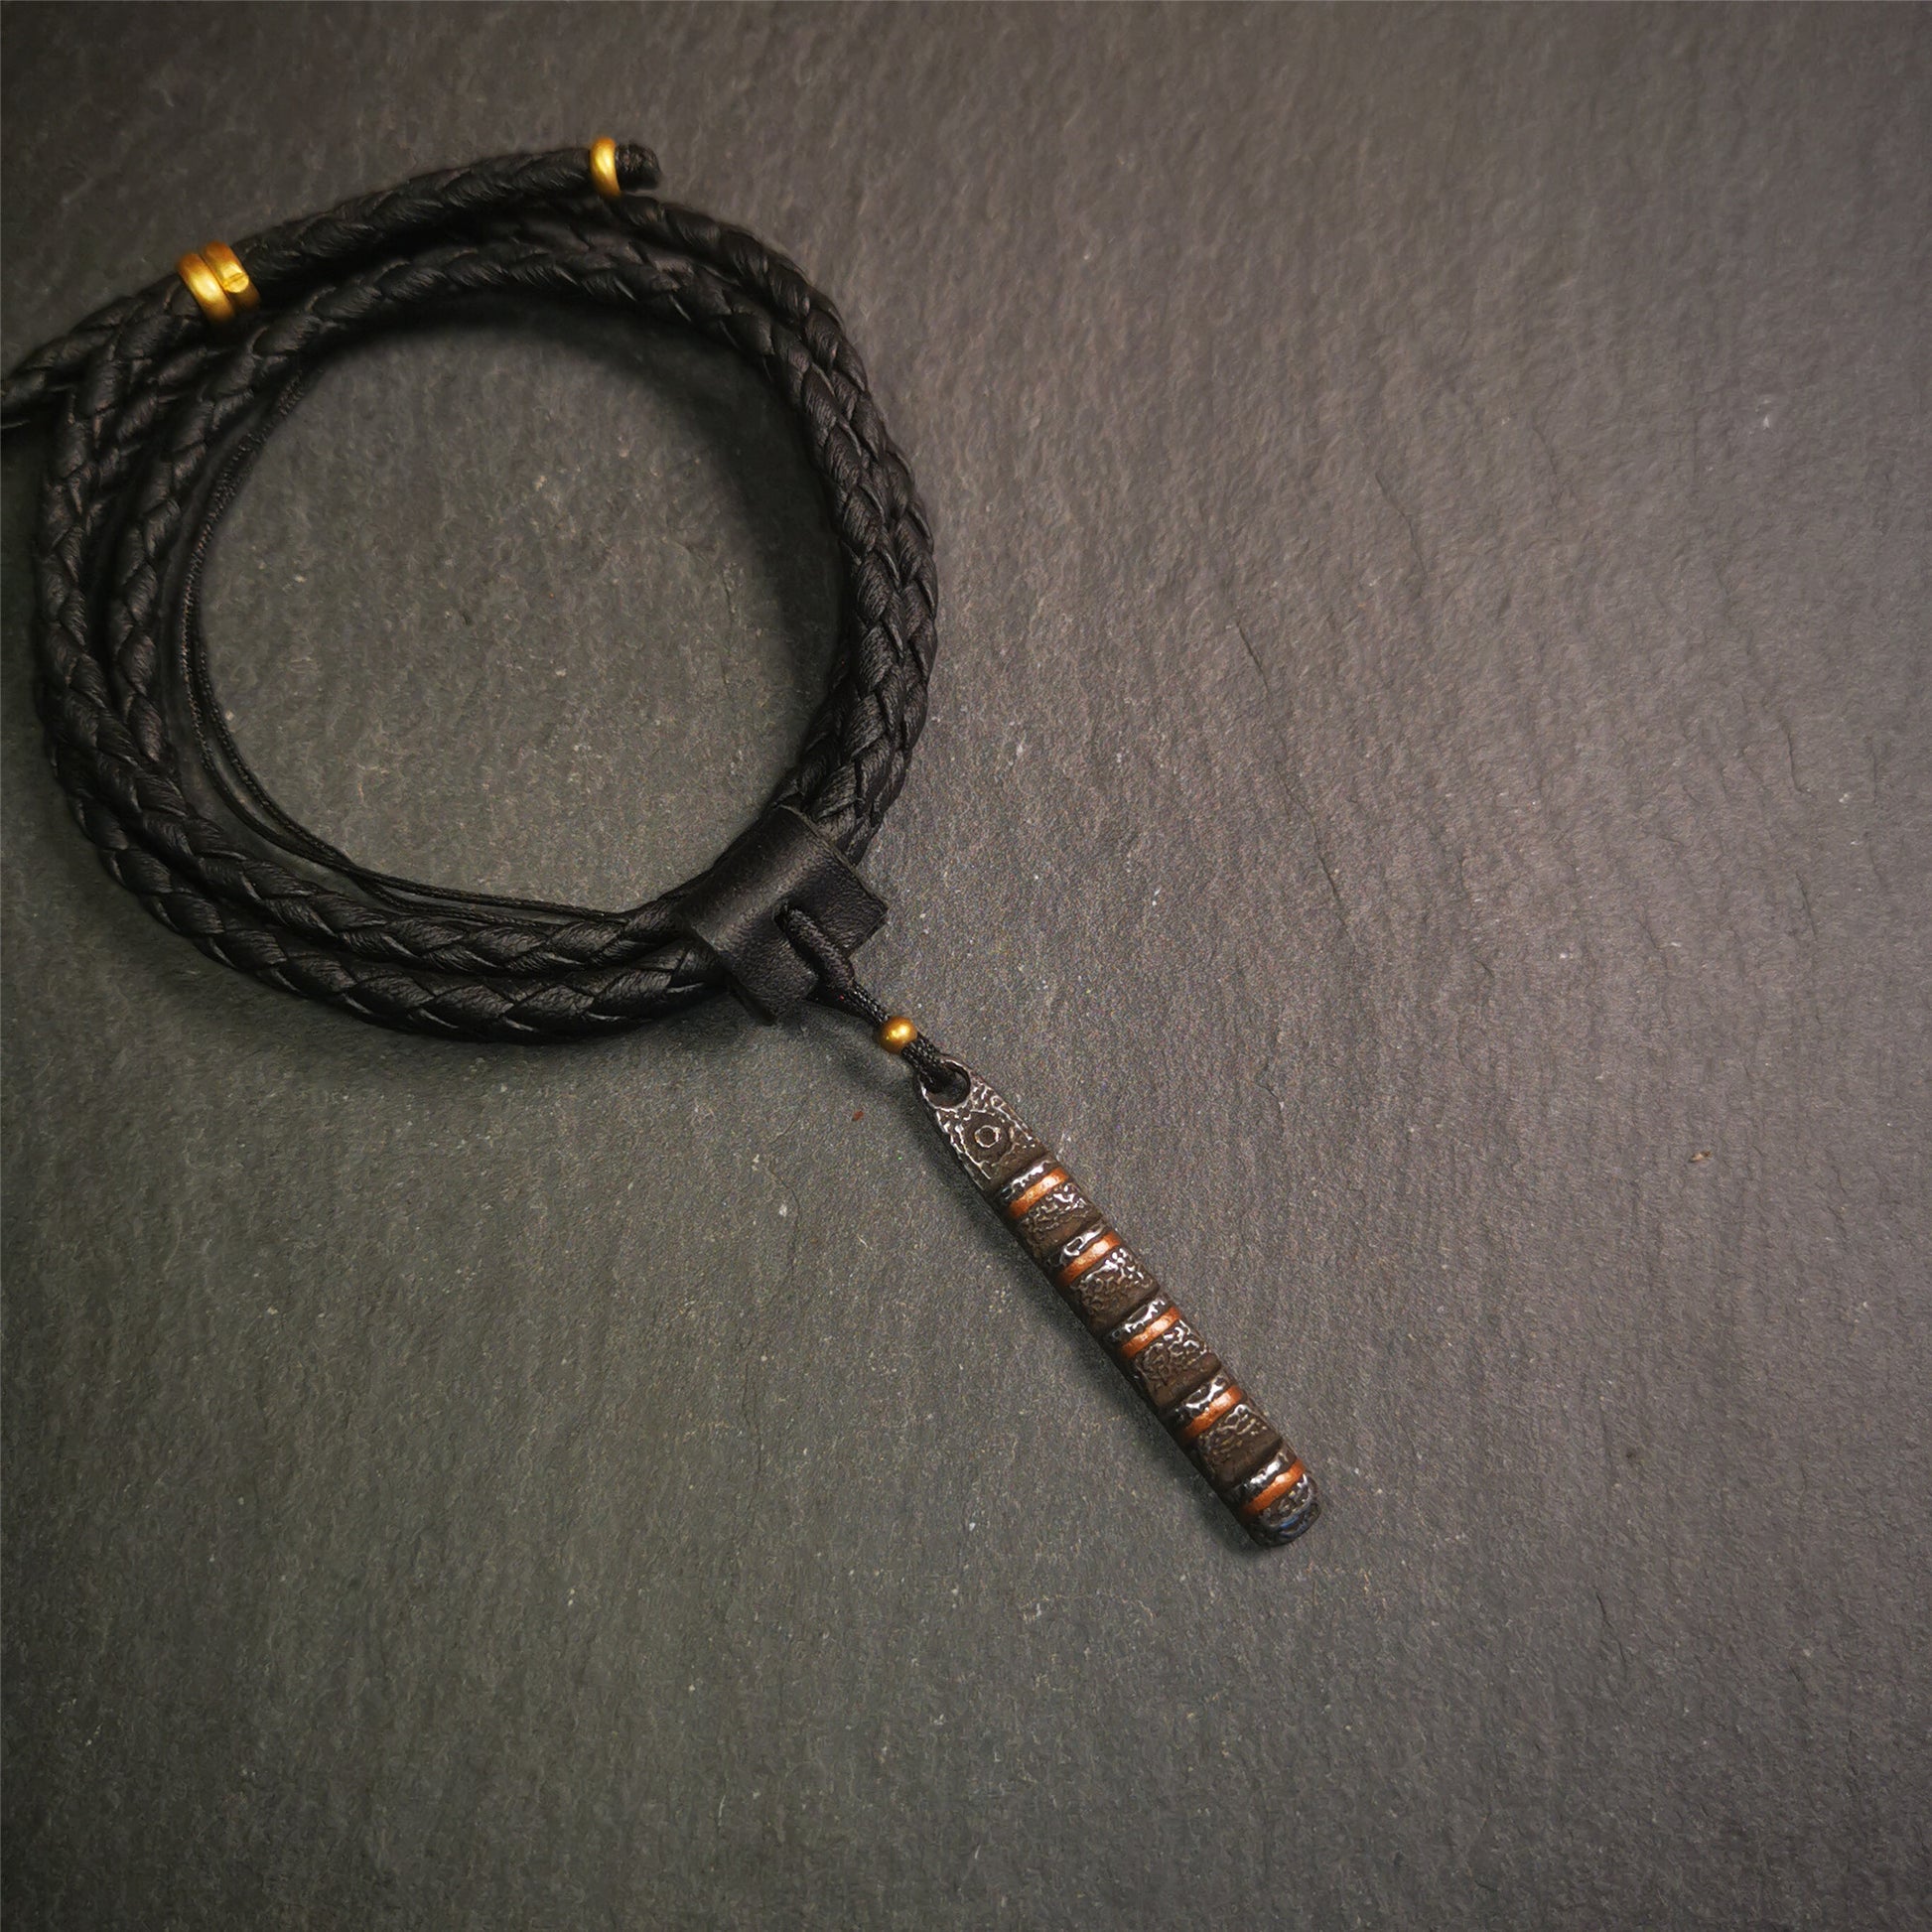 This unique Ladder pendant is made by Tibetan craftsmen. It is made of cold iron and copper, black color,the shape is Tibetan Ladder of Heaven,length is 45mm. You can make it into a pendant,keychain, or just put it on your desk,as an ornament.